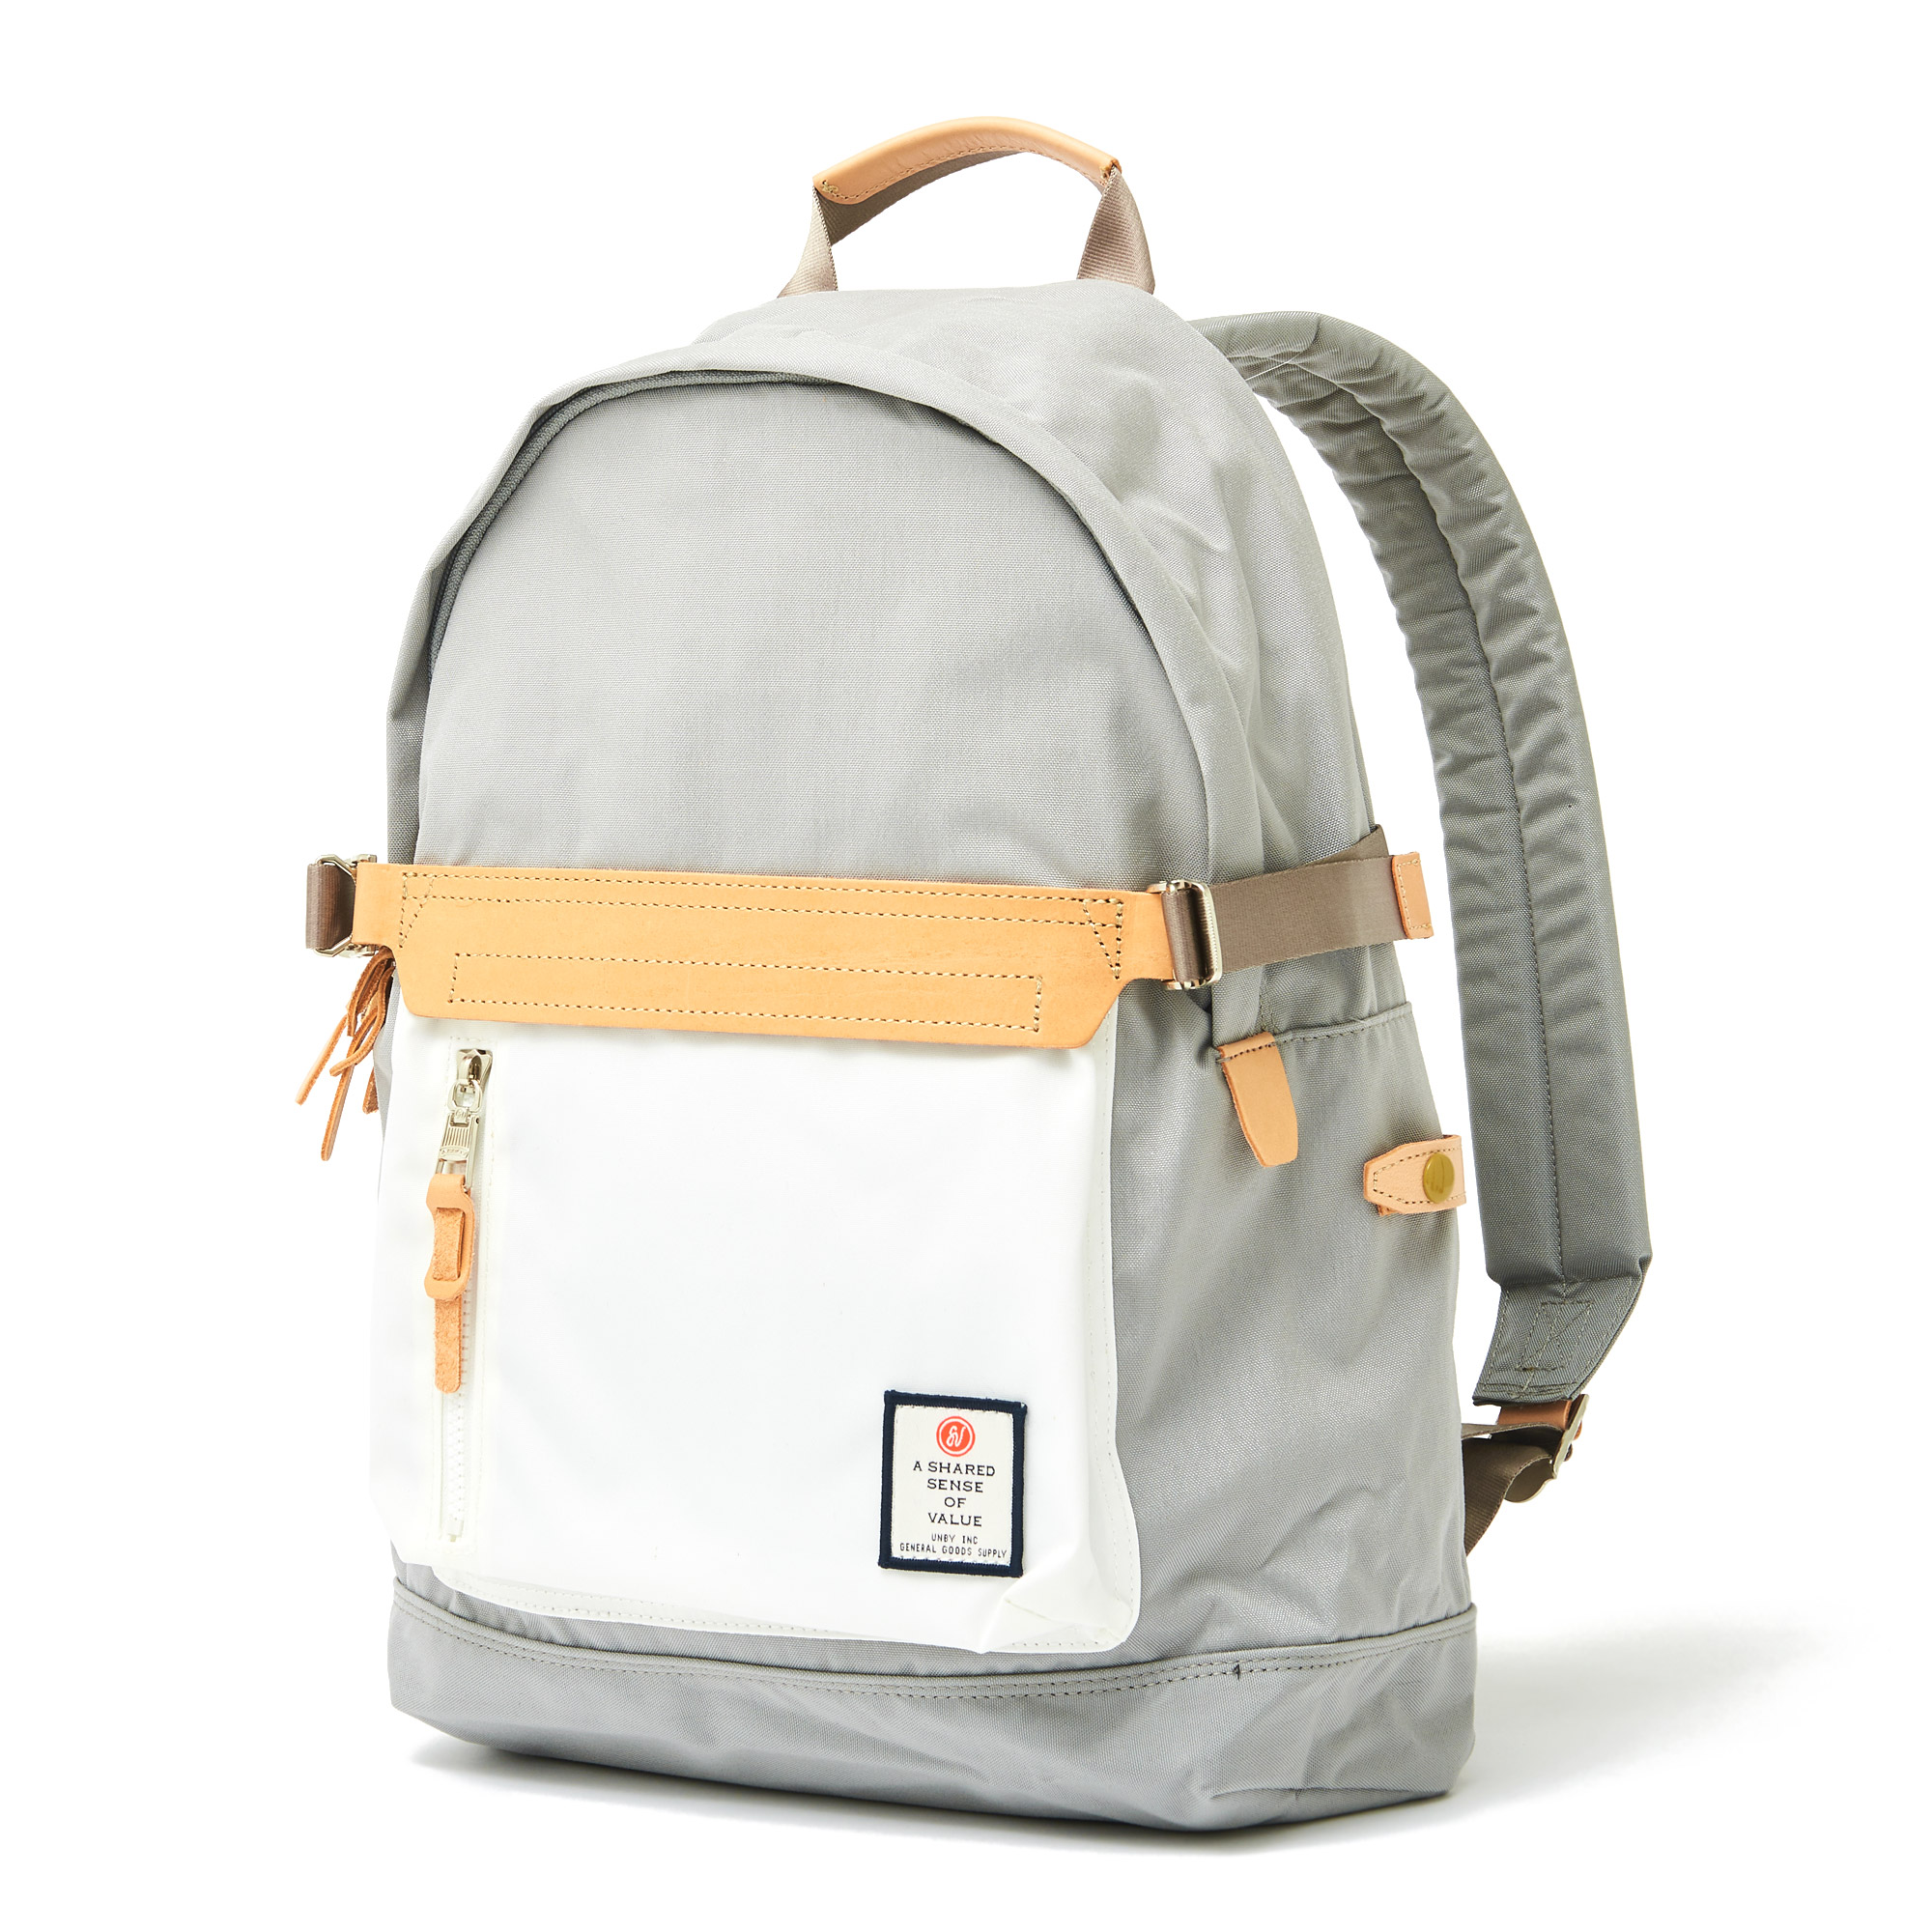 AS2OV HI DENSITY combination DAY PACK